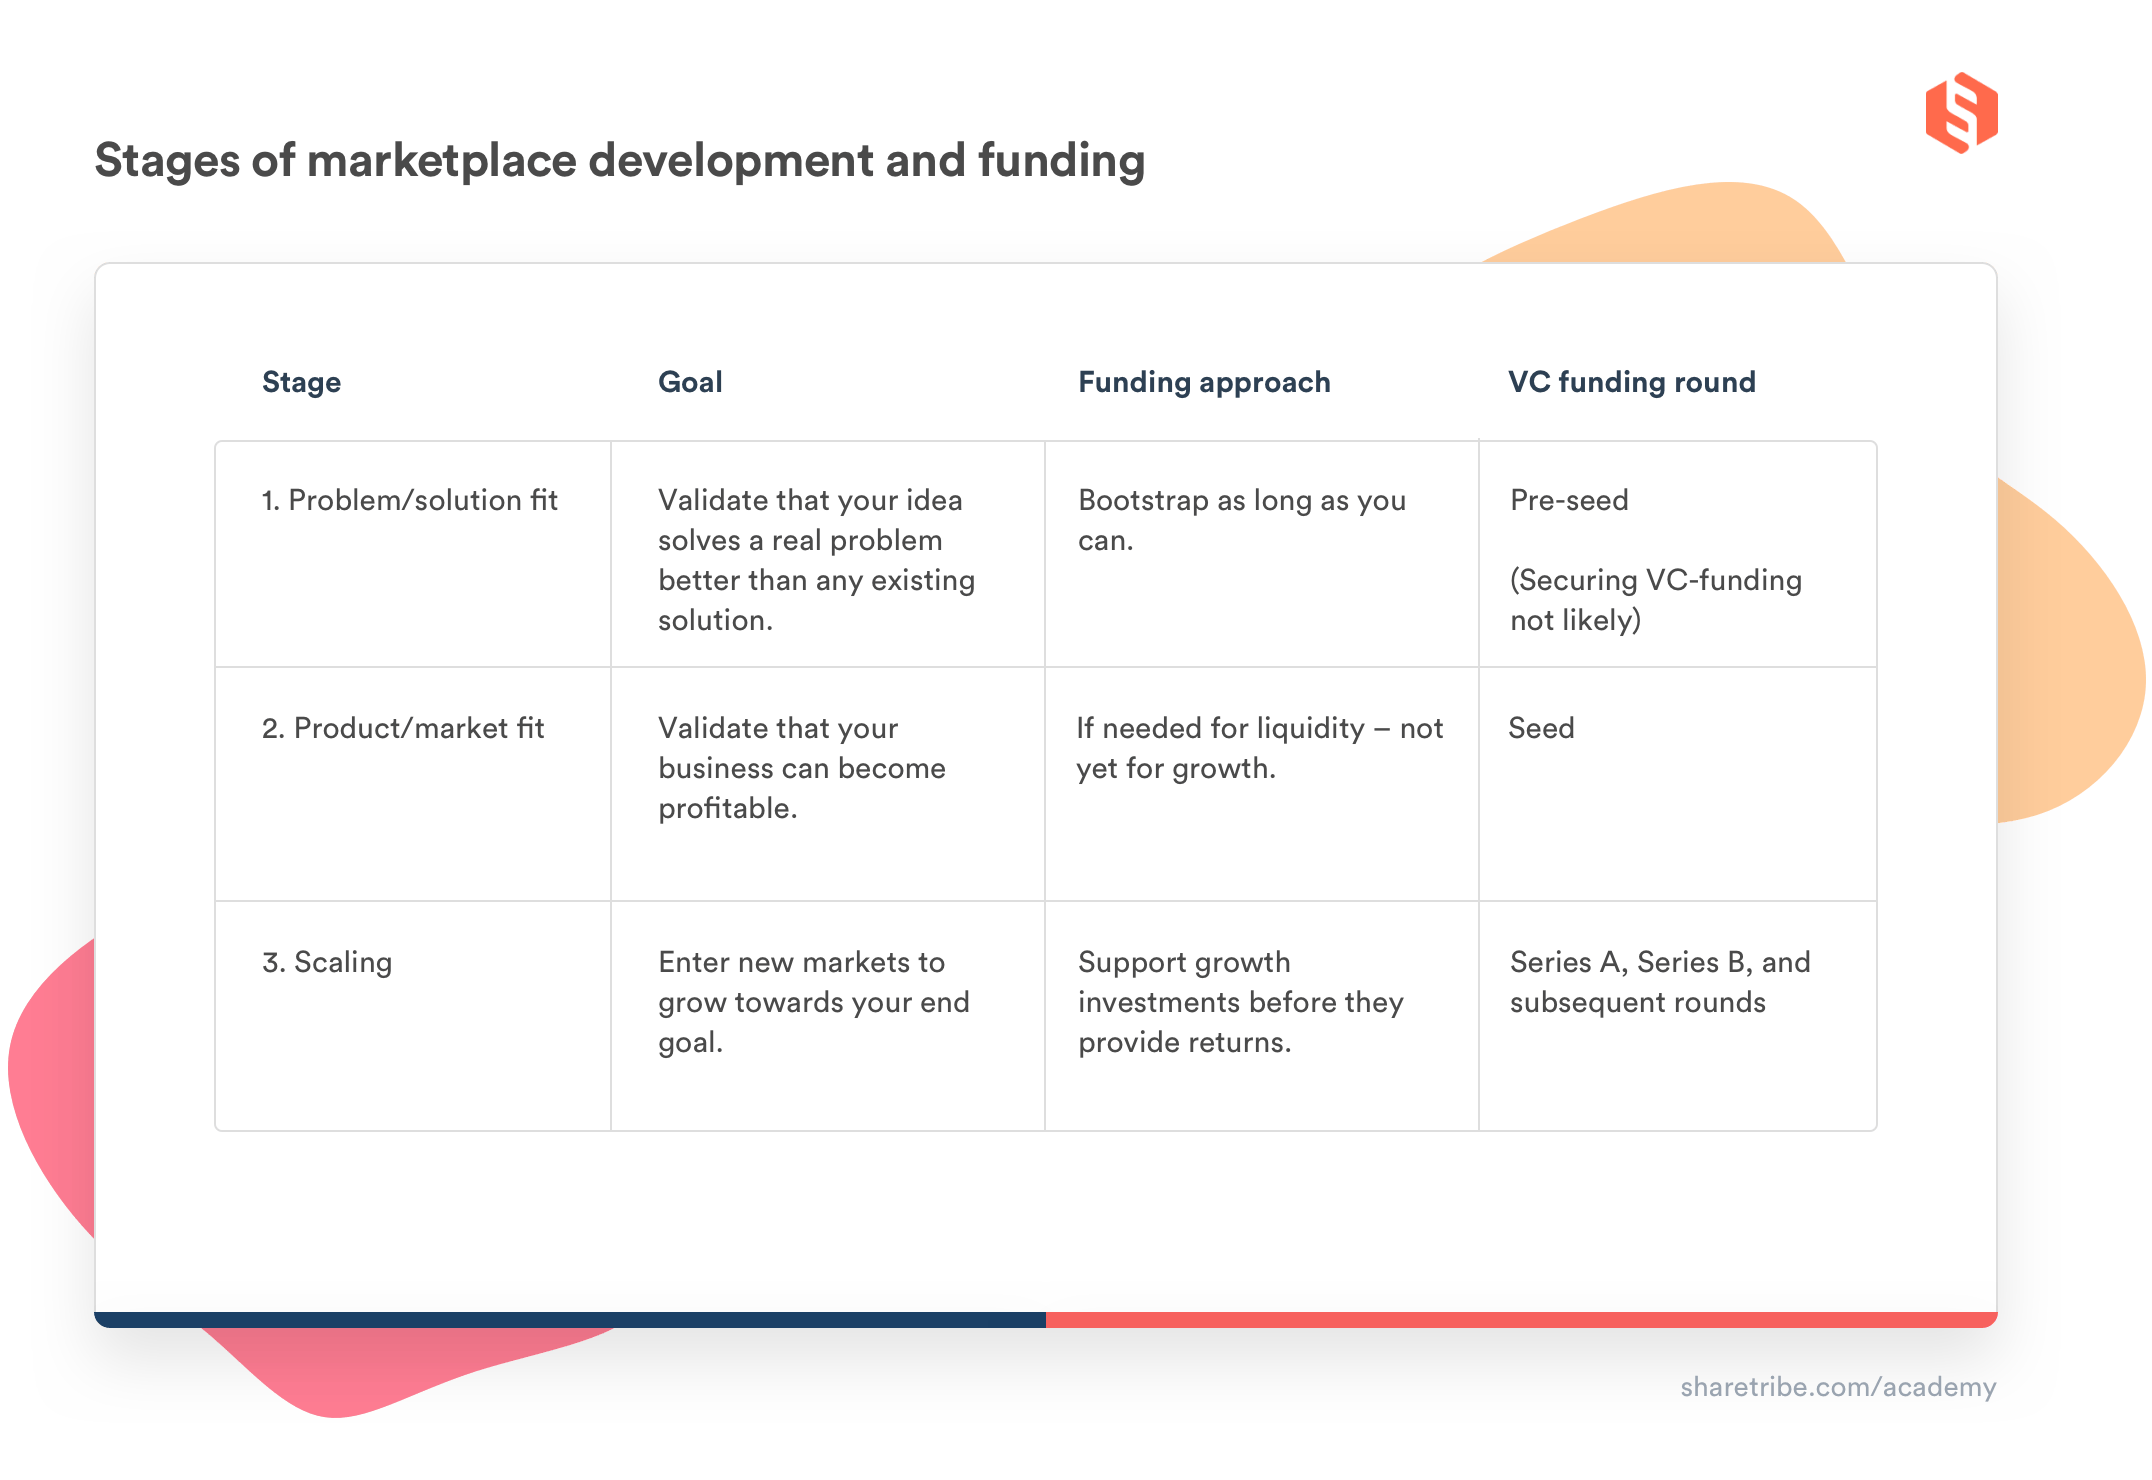 Table chart illustrating stages of marketplace development and VC funding stage.